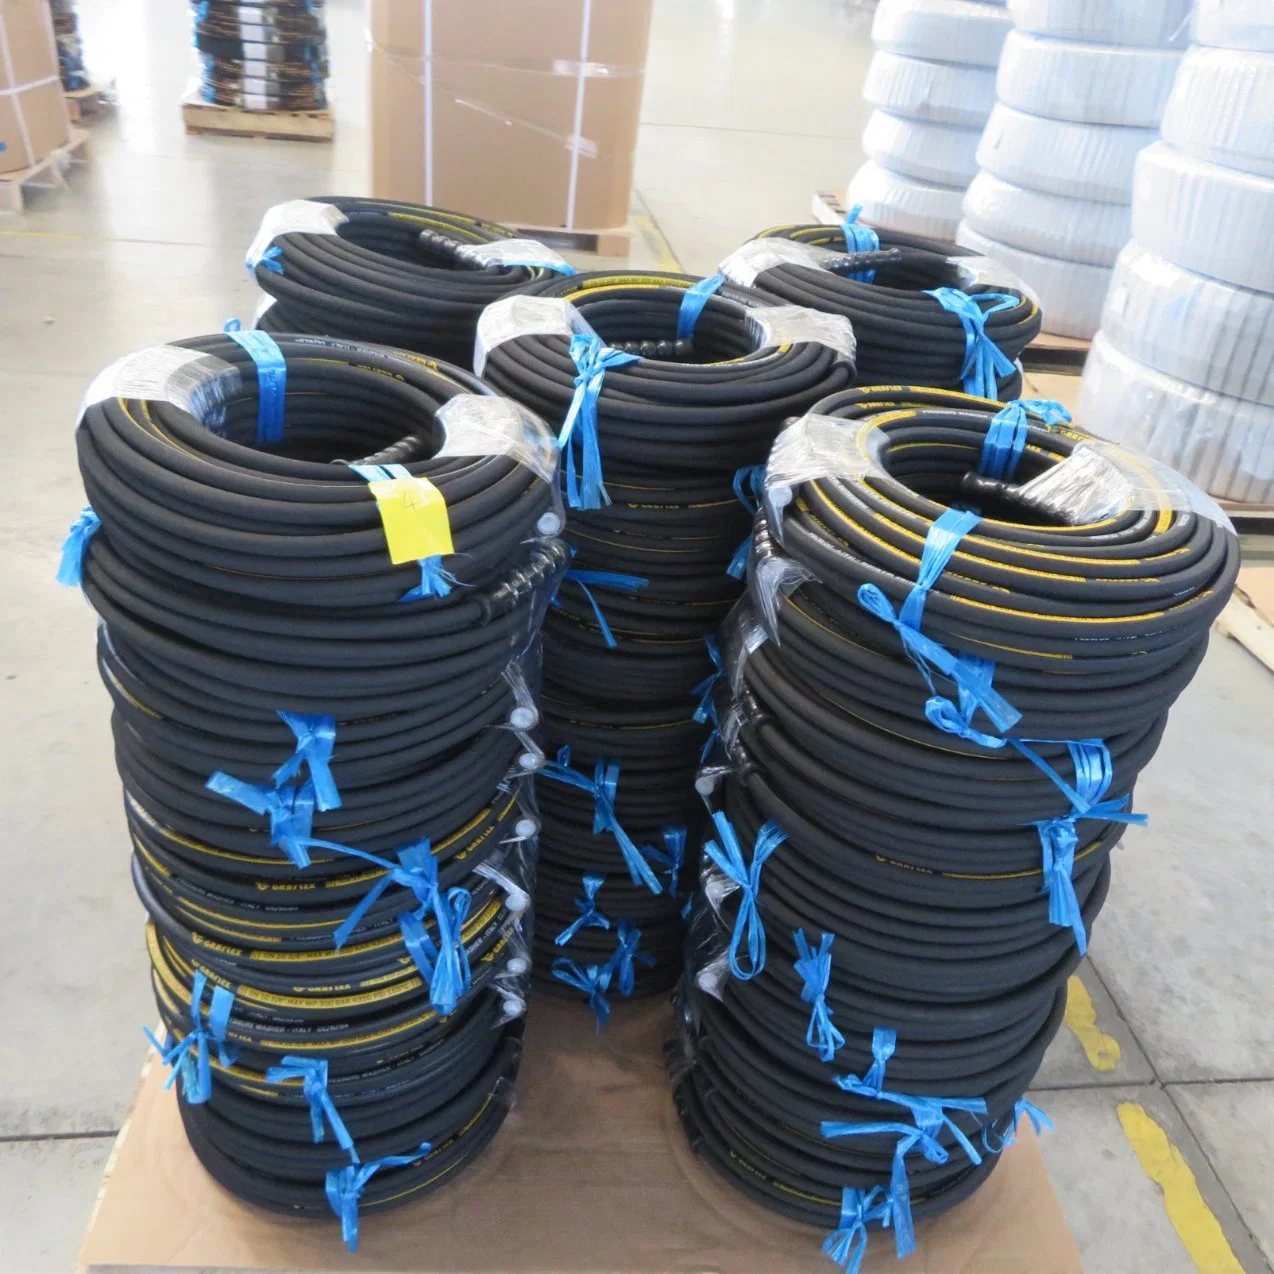 En853 2 Wire Braid Hose Rubber Hydraulic Hose Pressure Pipe and Fitting